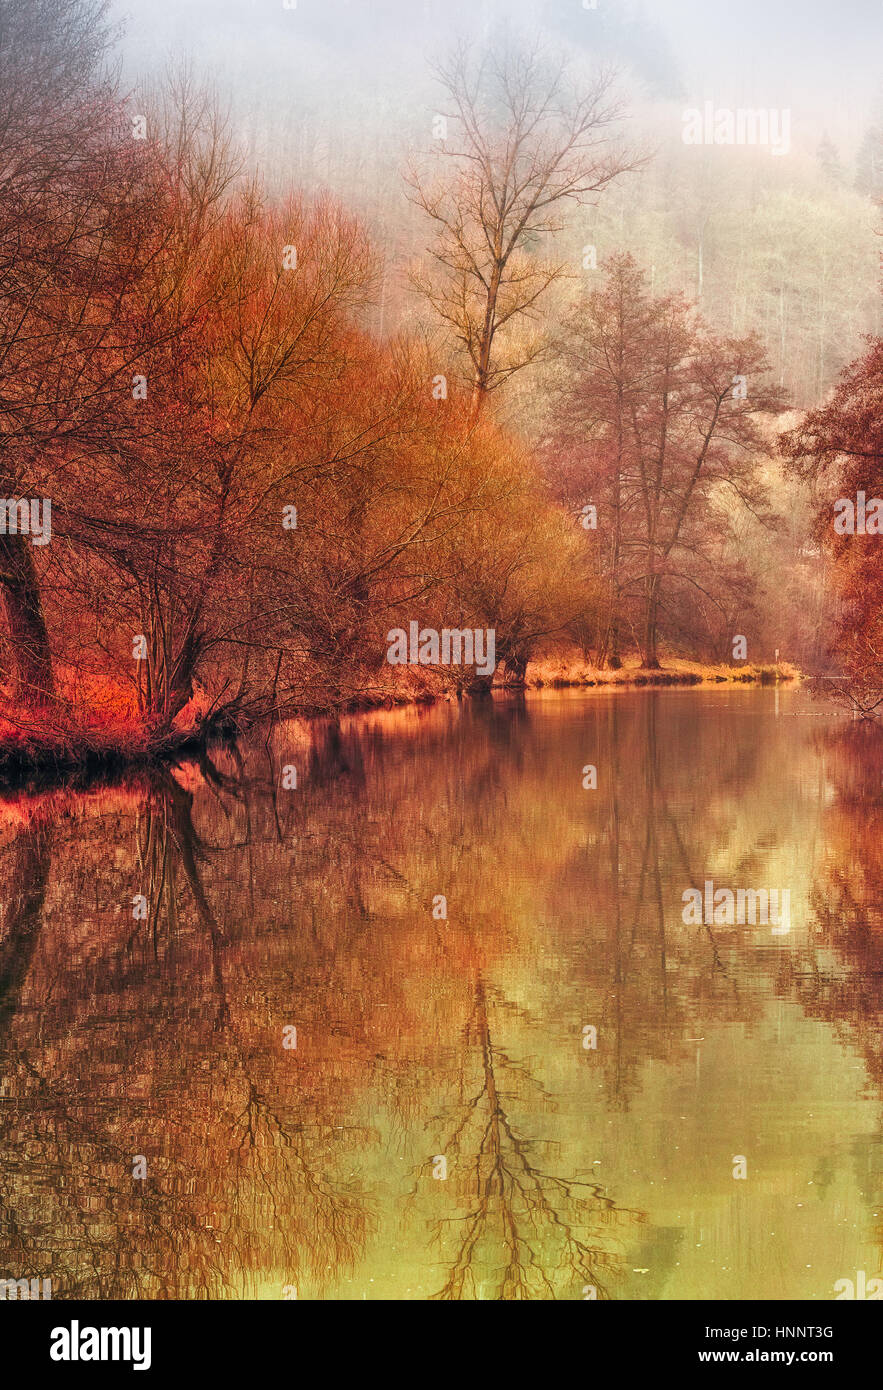 idyllic misty snowy retro color riverside,old trees reflecting on the water,vintage painting style,moody red golden landscape impression Stock Photo